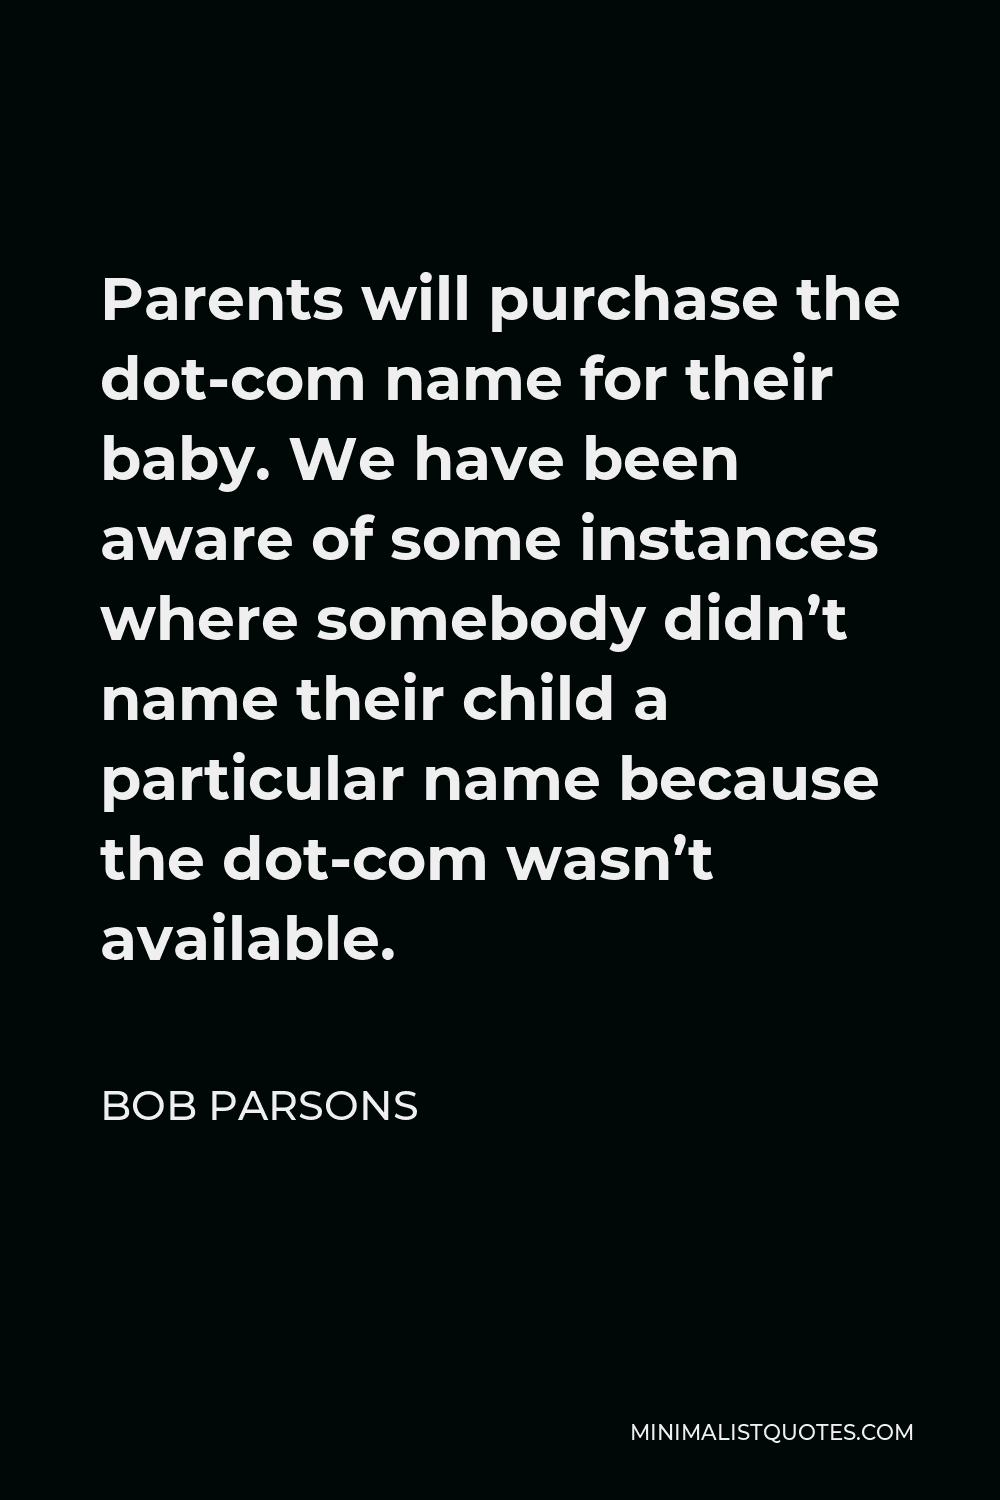 Bob Parsons Quote - Parents will purchase the dot-com name for their baby. We have been aware of some instances where somebody didn’t name their child a particular name because the dot-com wasn’t available.